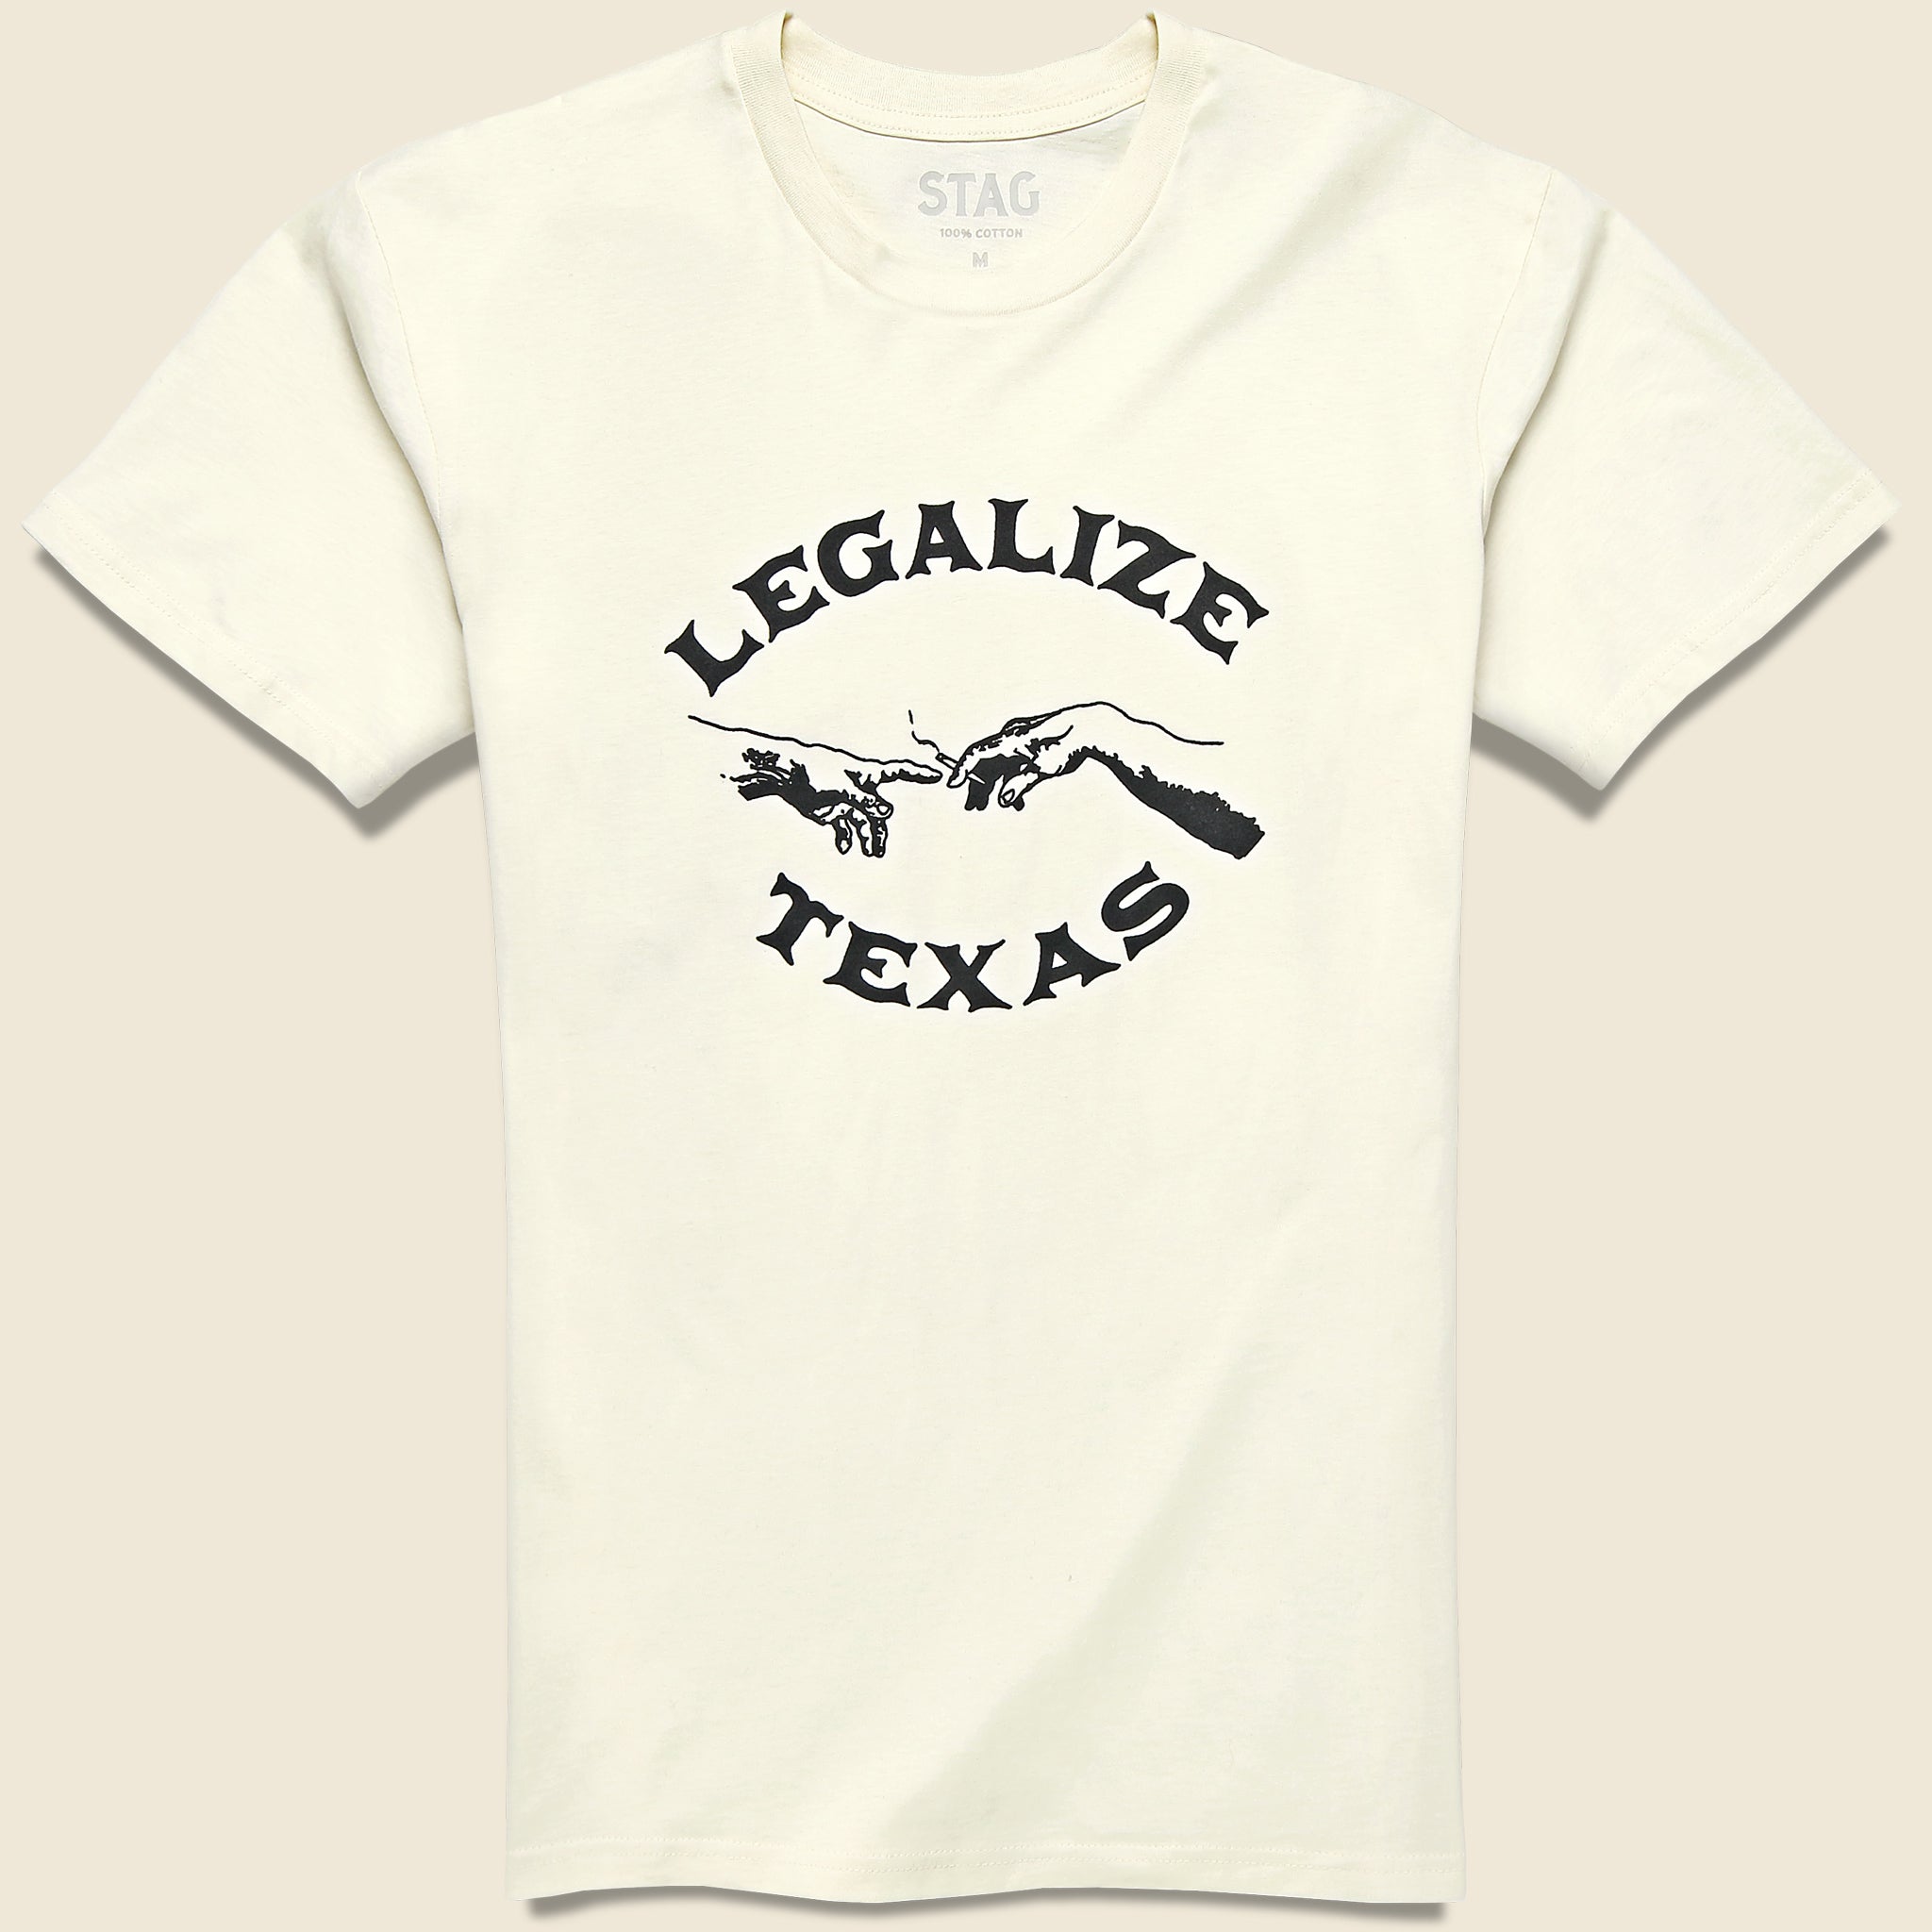 STAG, Graphic Tee - Legalize Texas